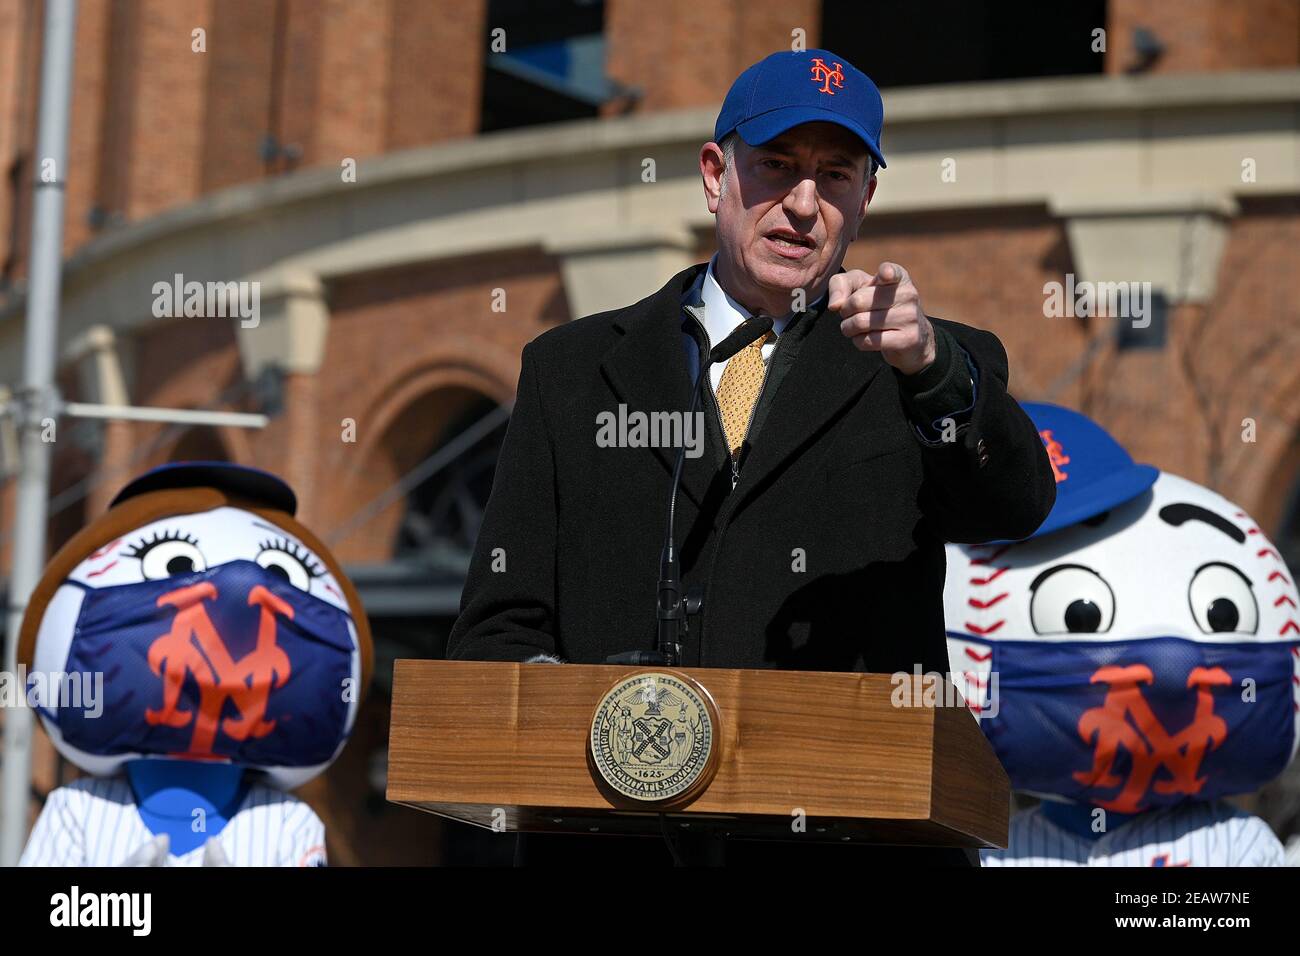 With Mr. and Mrs, Mets mascots in the background, New York City Mayor Bill de Blasio speaks at a press conference on opening day of Mets Citi Field stadium as a COVID-19 Vaccine Mega Hub in the Flushing Meadows-Corona Park section of Queens, New York, NY, February 10, 2021. With only 250 vaccine doses available on the first day, prioritization went to livery car drivers (taxi and Uber), food service workers and Queens residents only, as more doses become available the site is expected to run 24hrs a day and serve more than 5000 daily doses of the vaccine. (Photo by Anthony Behar/Sipa USA) Stock Photo